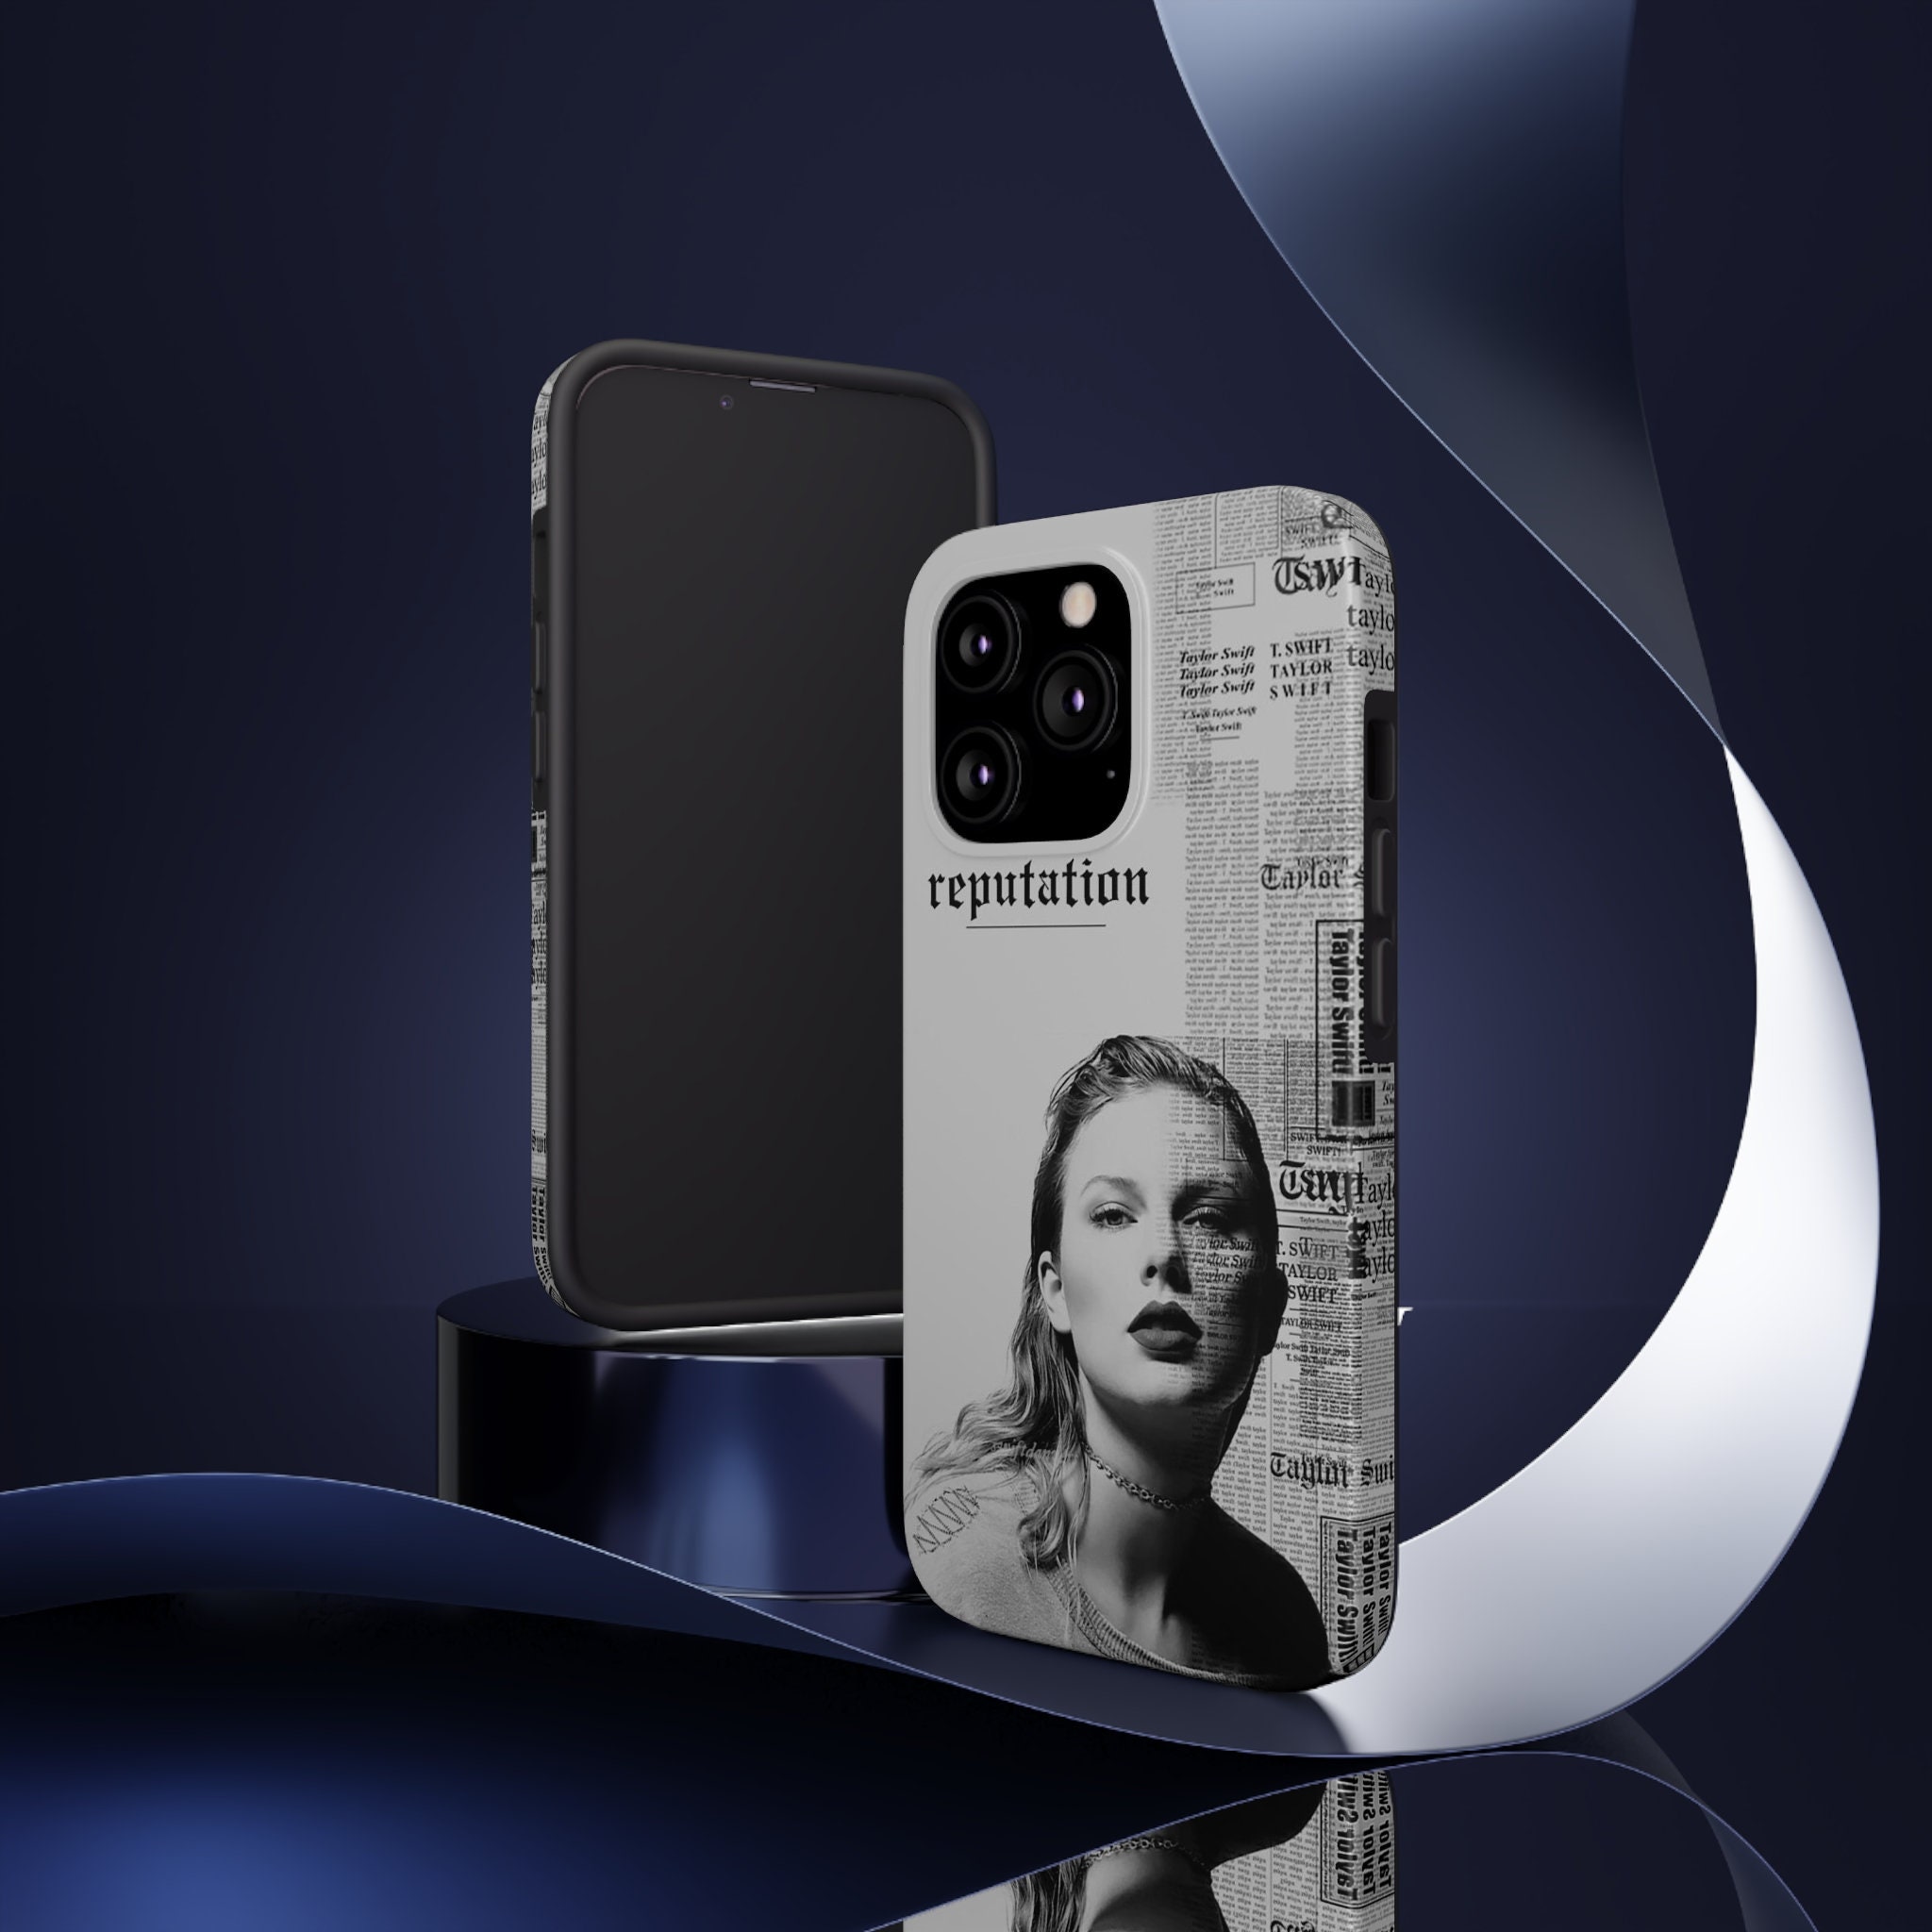 Discover Taylor Reputation Phone case for iPhone Case